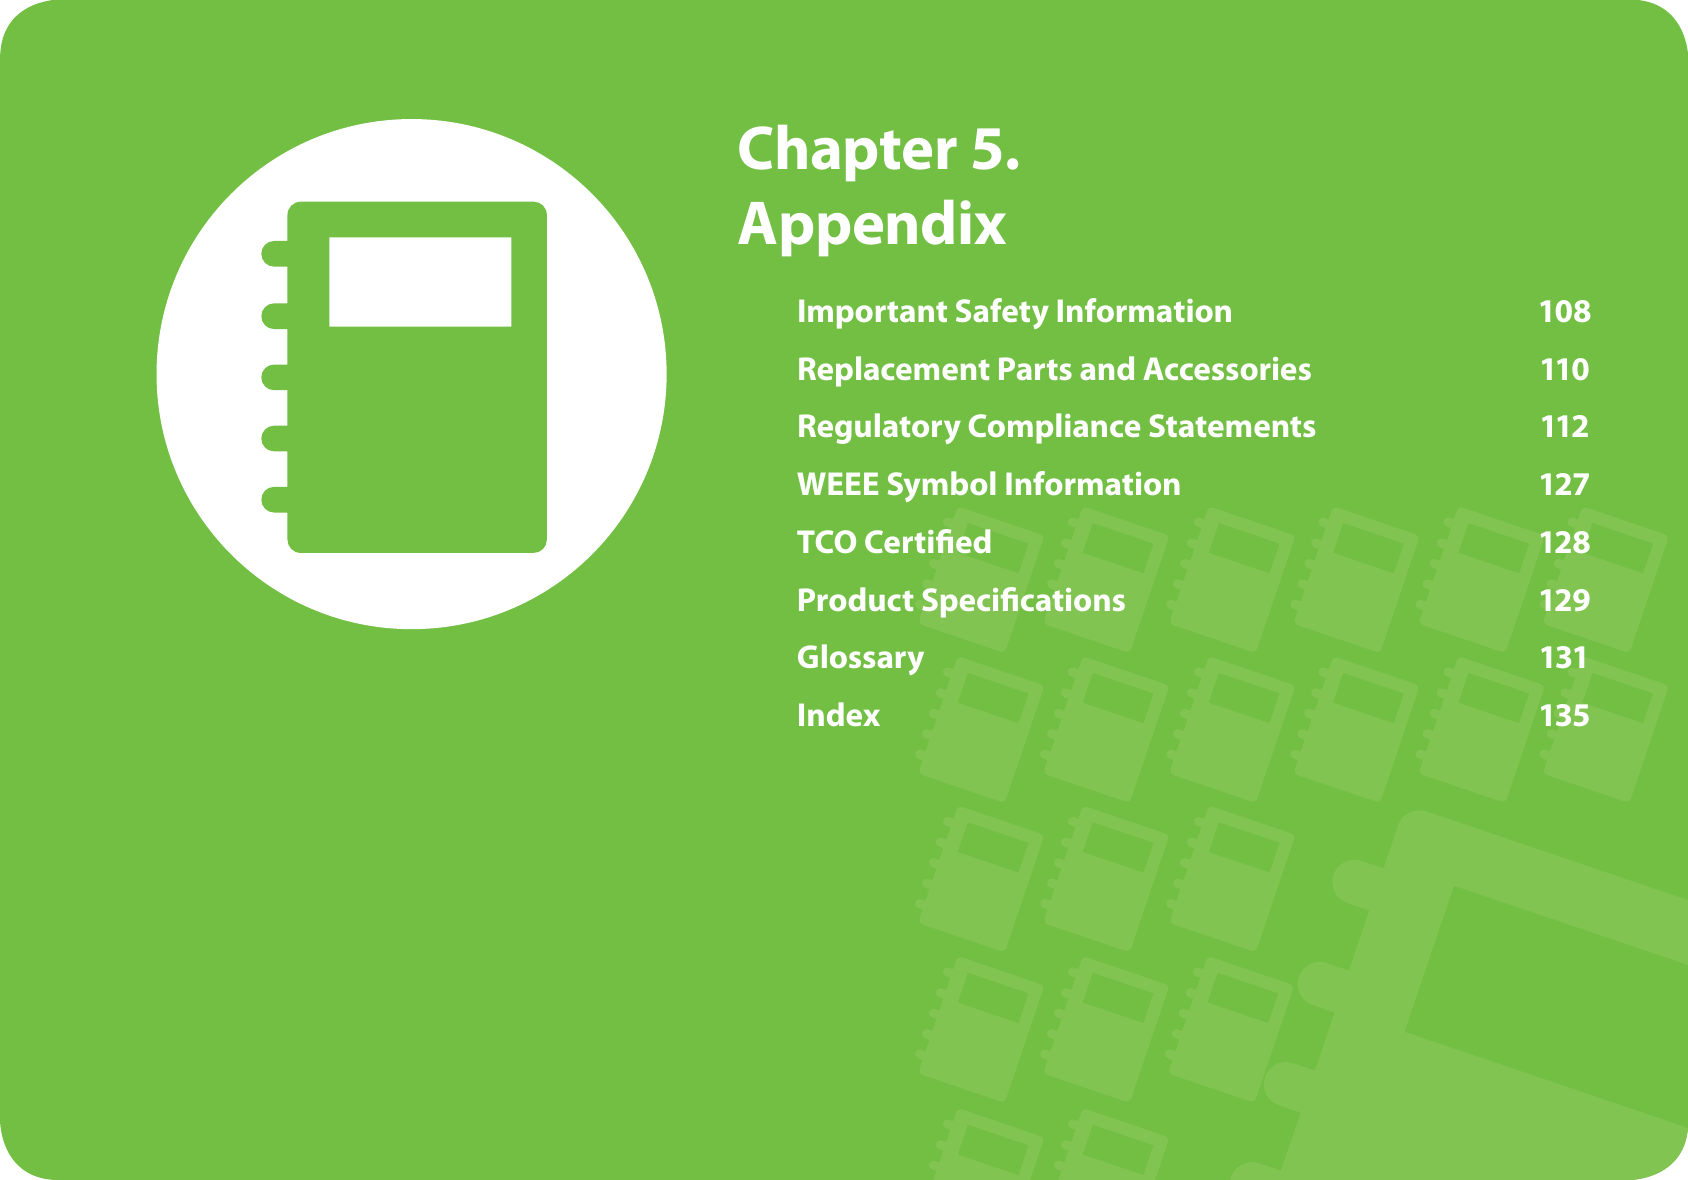  Chapter  5.  AppendixImportant Safety Information  108Replacement Parts and Accessories  110Regulatory Compliance Statements  112WEEE Symbol Information  127TCO Certi ed  128Product Speci cations  129Glossary 131Index 135